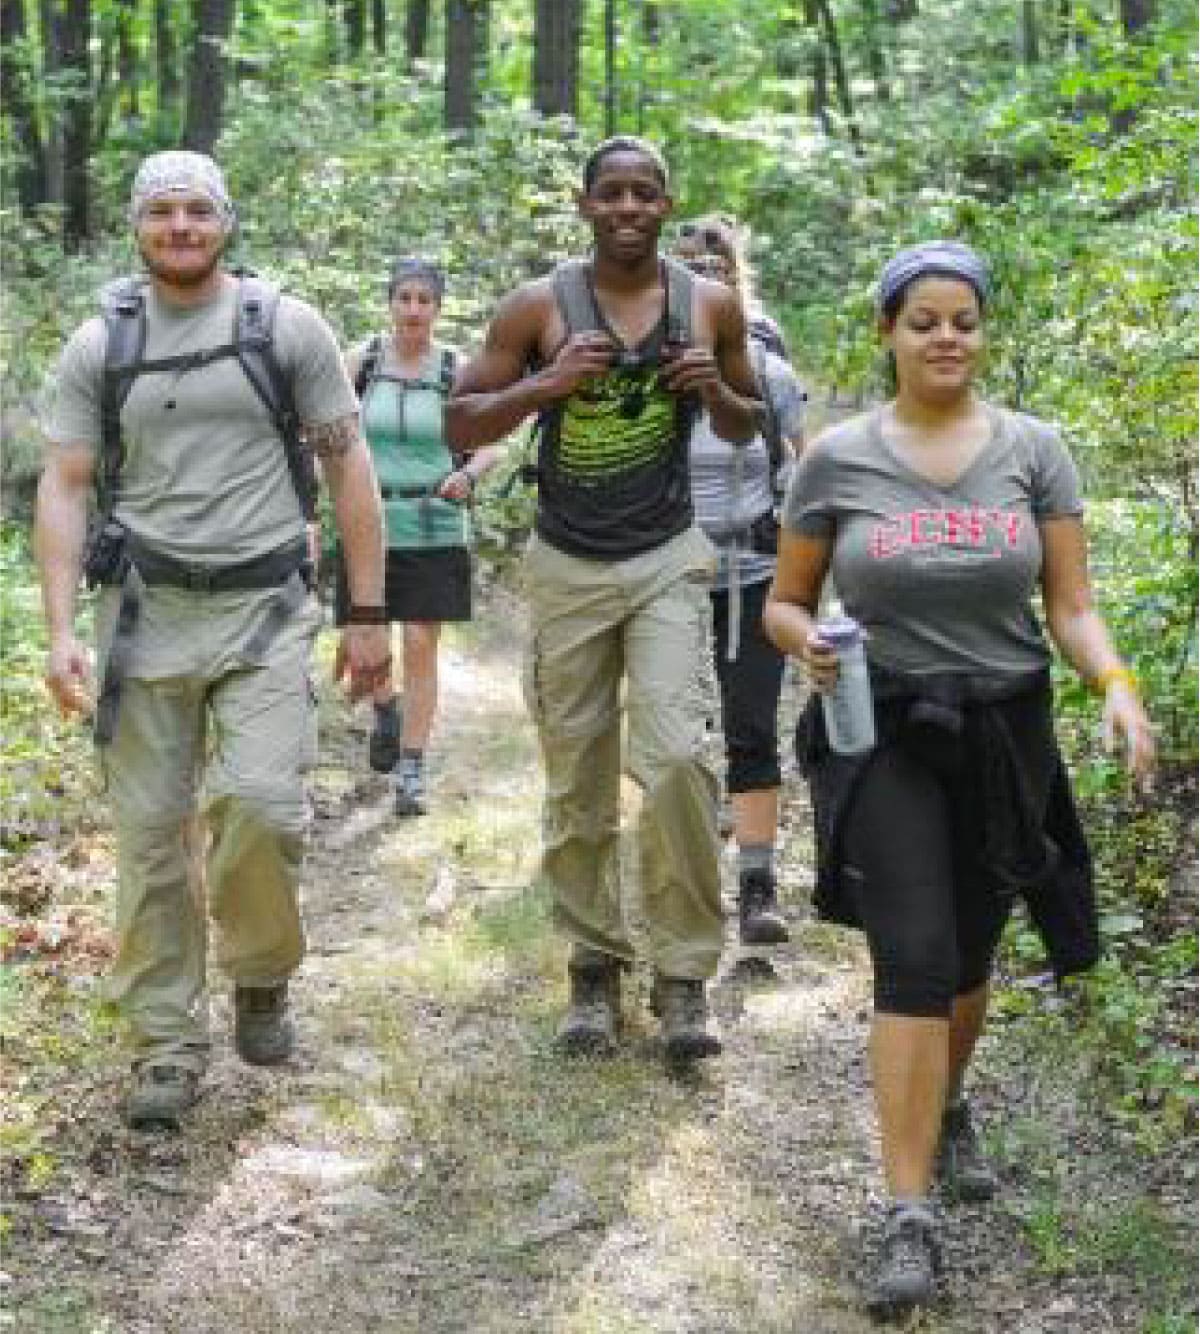 Members of the YM Committee on a hike